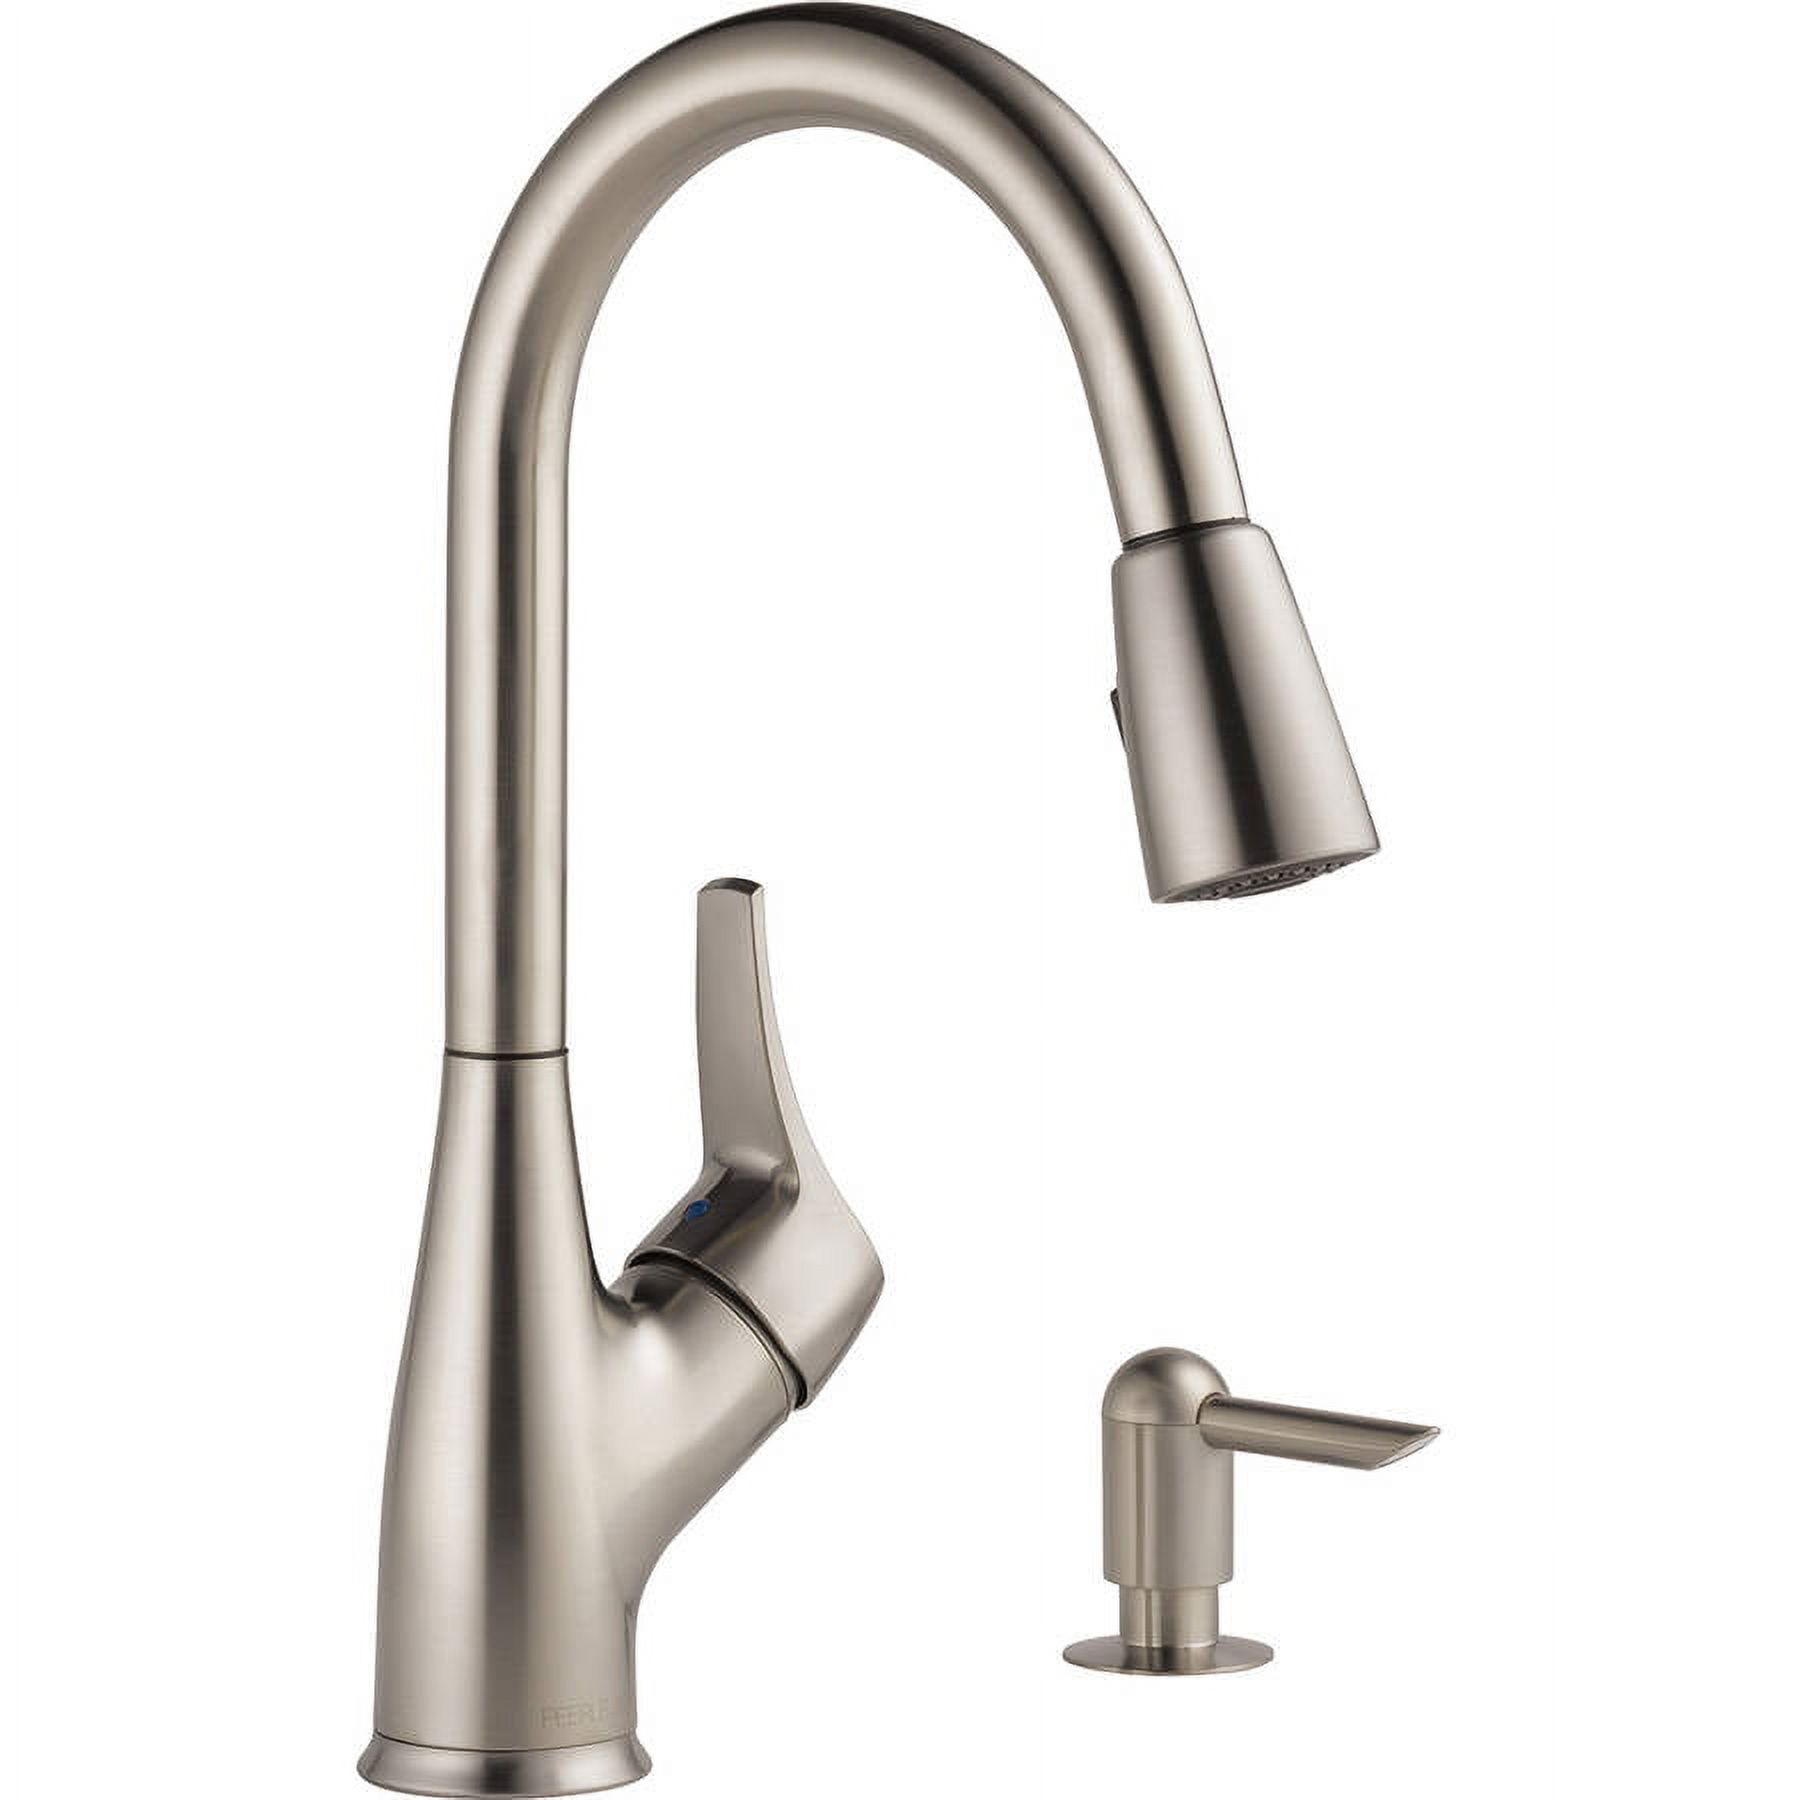 Peerless Single Handle Pull-Down Sprayer Kitchen Faucet with Soap - image 1 of 7